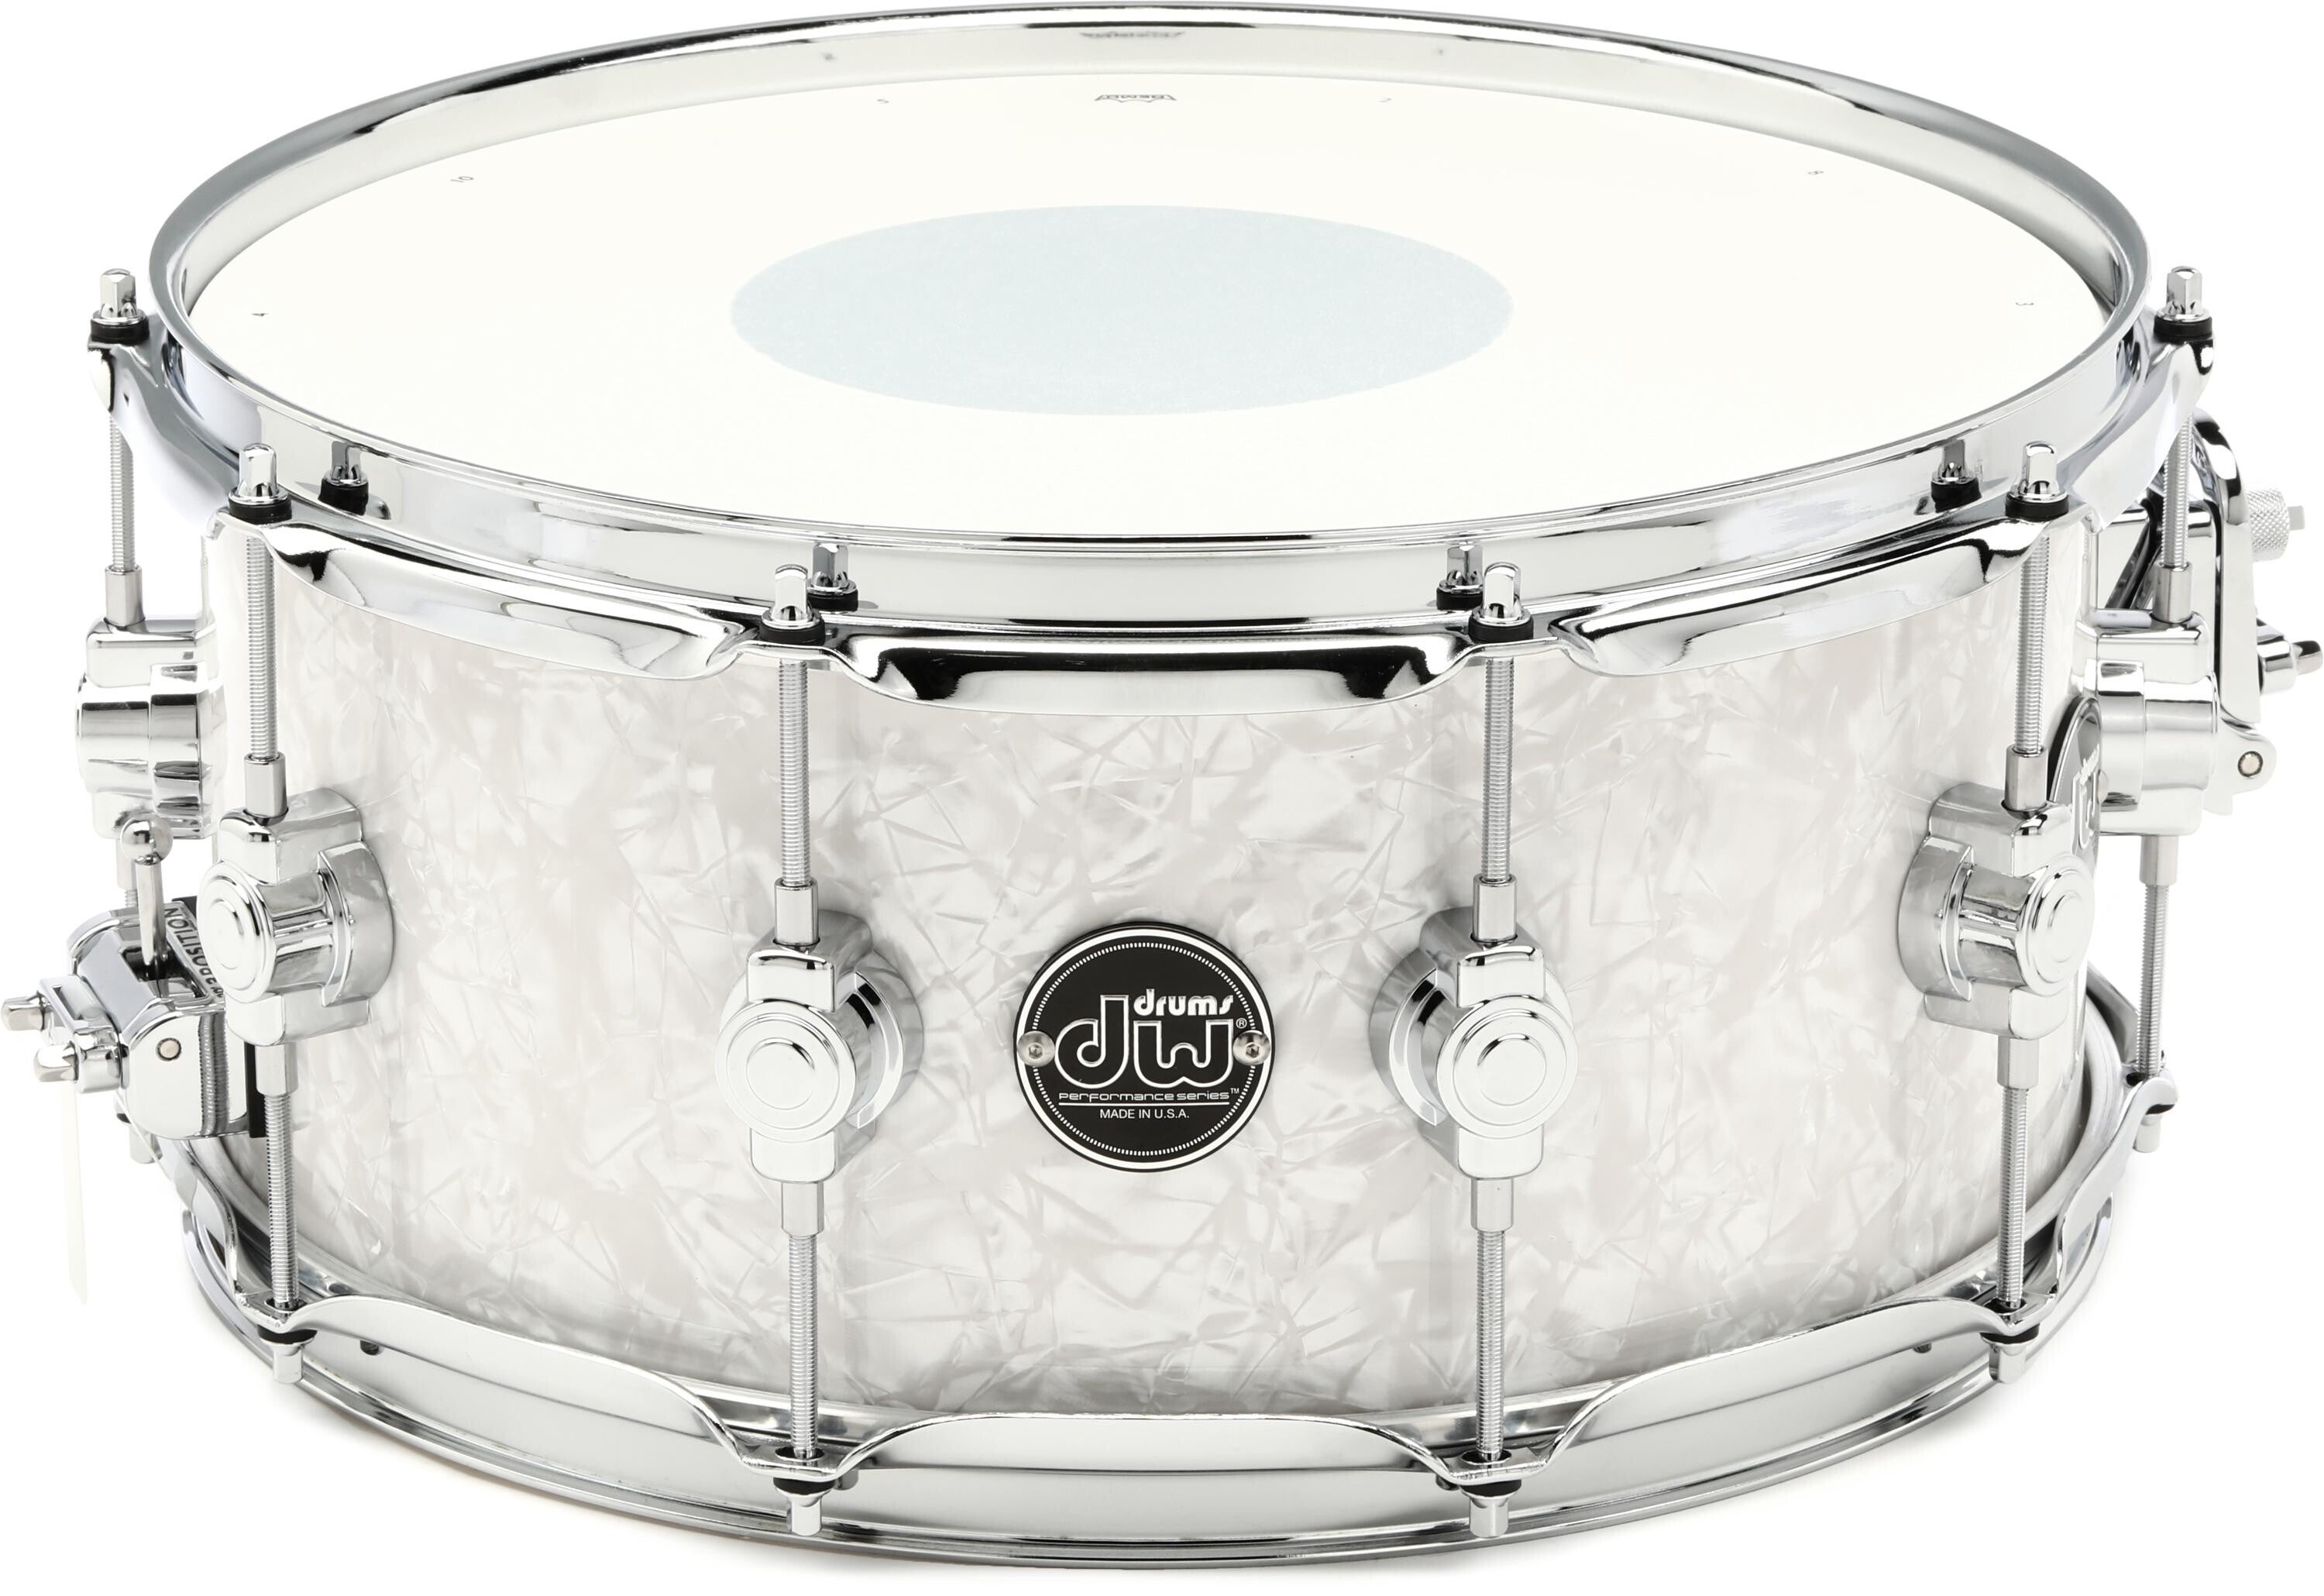 DW Performance Series Snare Drum   6.5 x  inch   White Marine Finish Ply